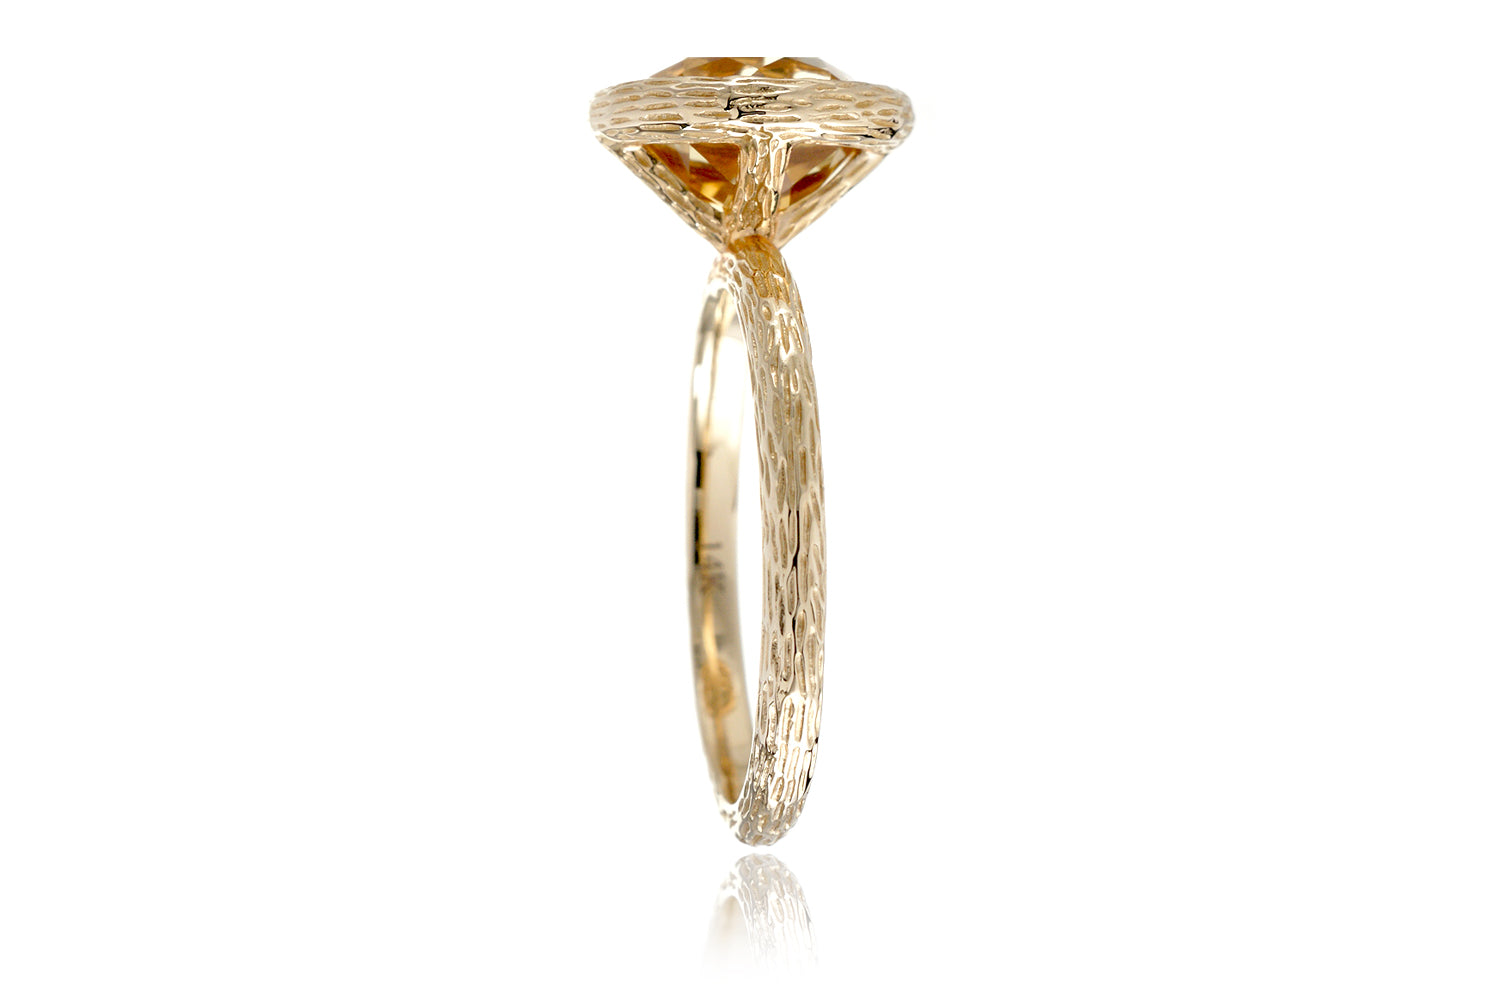 The Twig Round Citrine Ring (8mm)